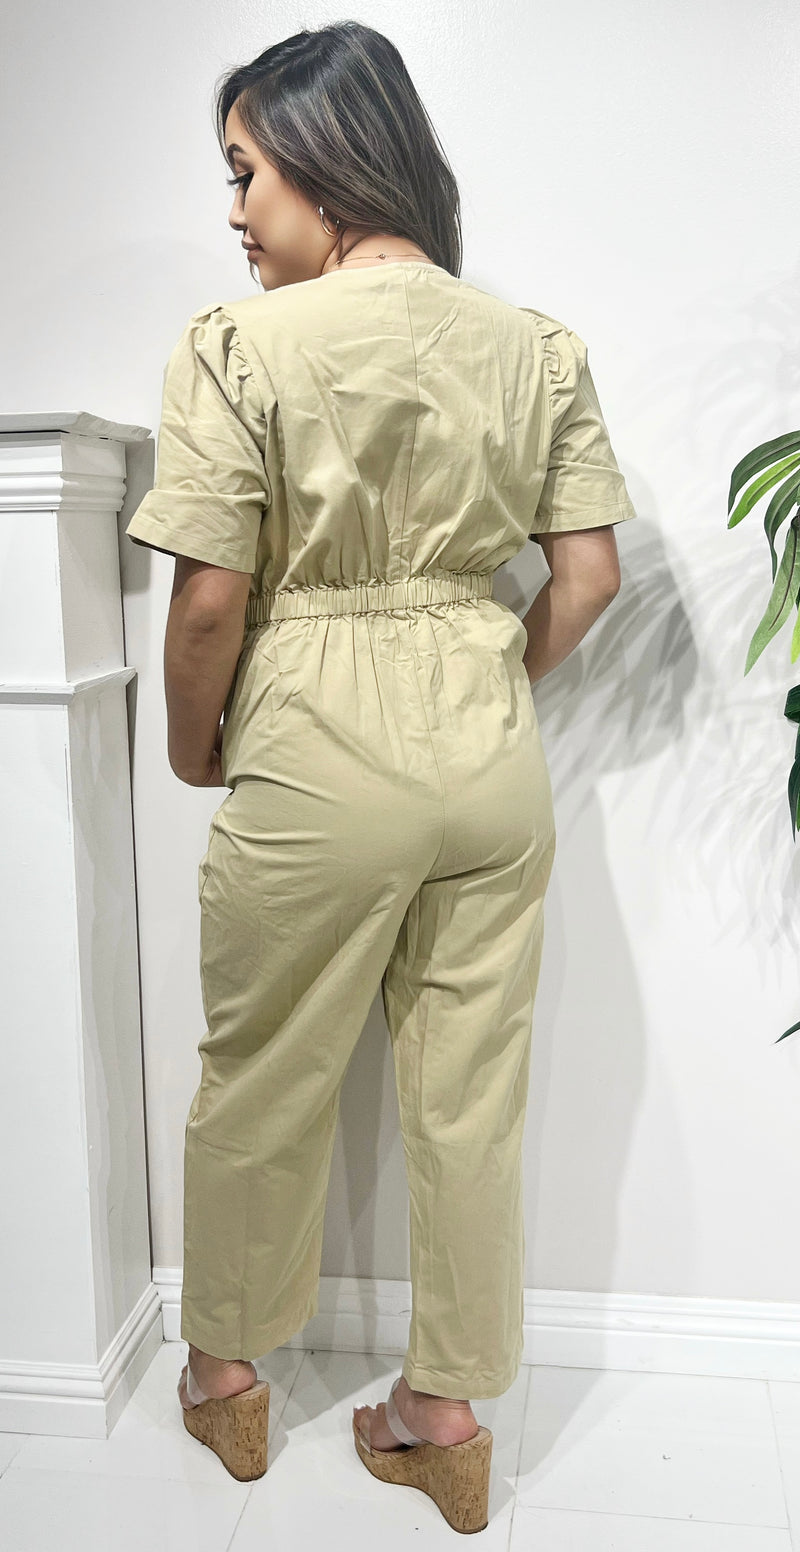 Jeans Warehouse Hawaii - SOLID JUMPERS - SHORT SLEEVE UTILITY JUMPSUIT | By ASB FASHION LLC